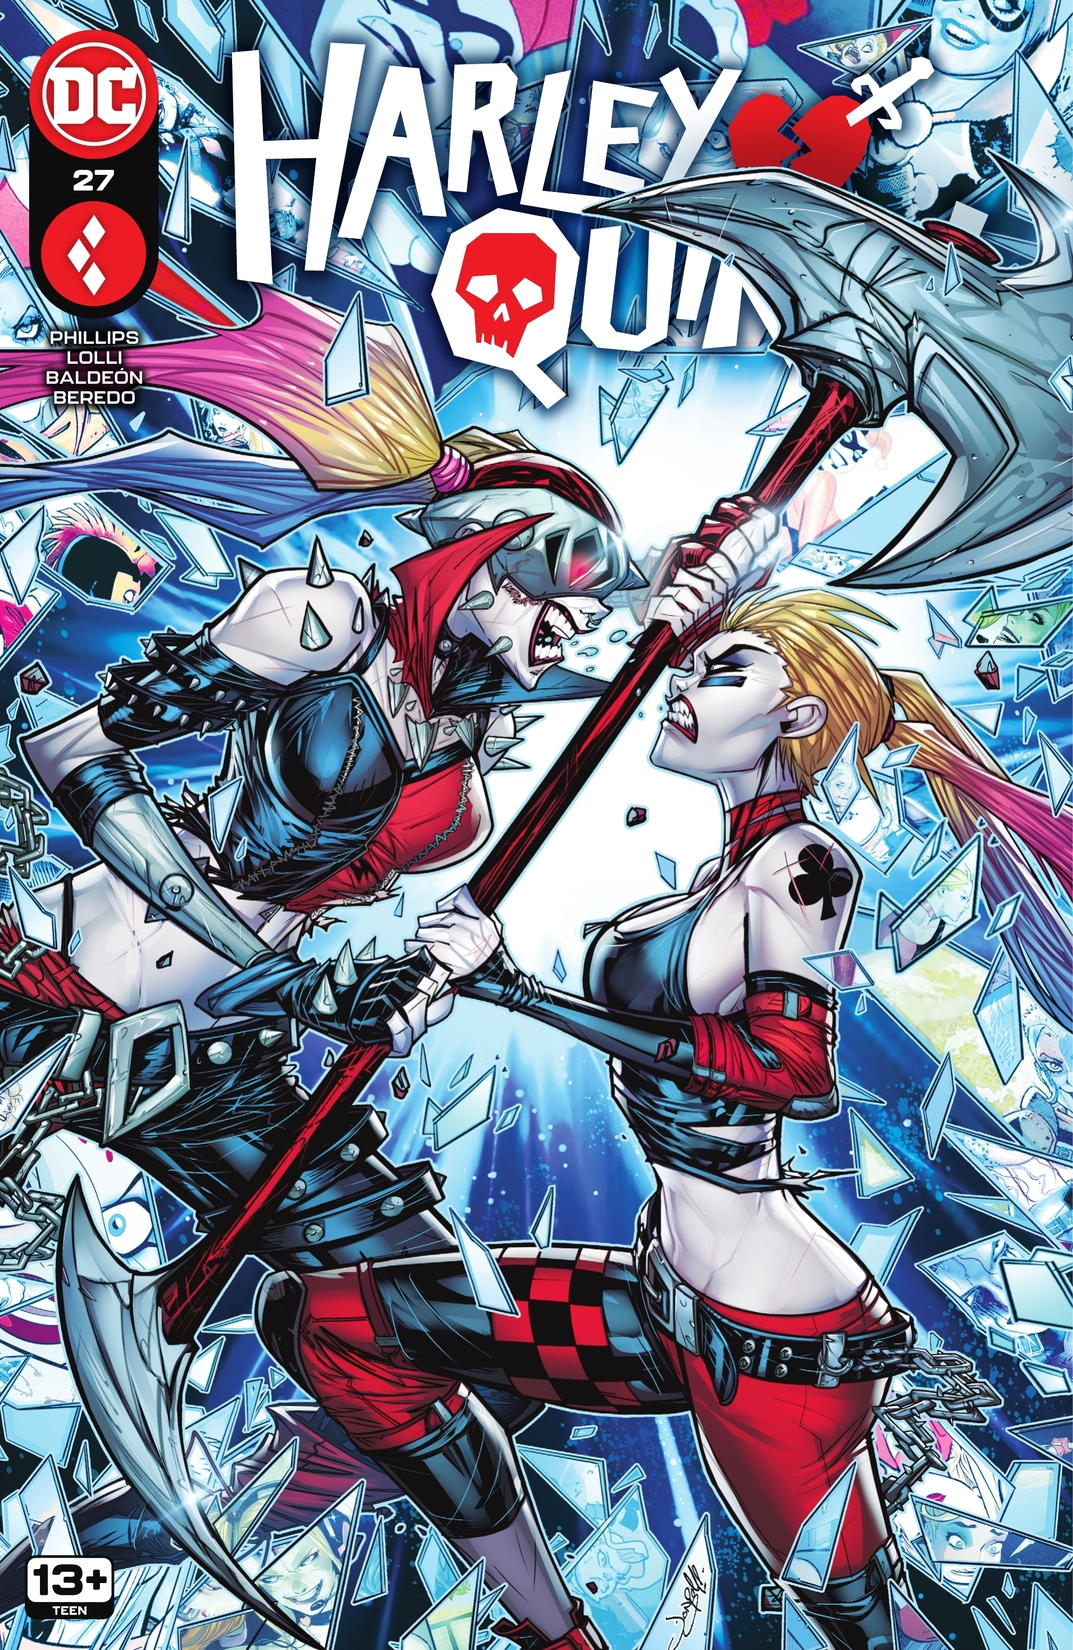 Harley Quinn #27 preview images